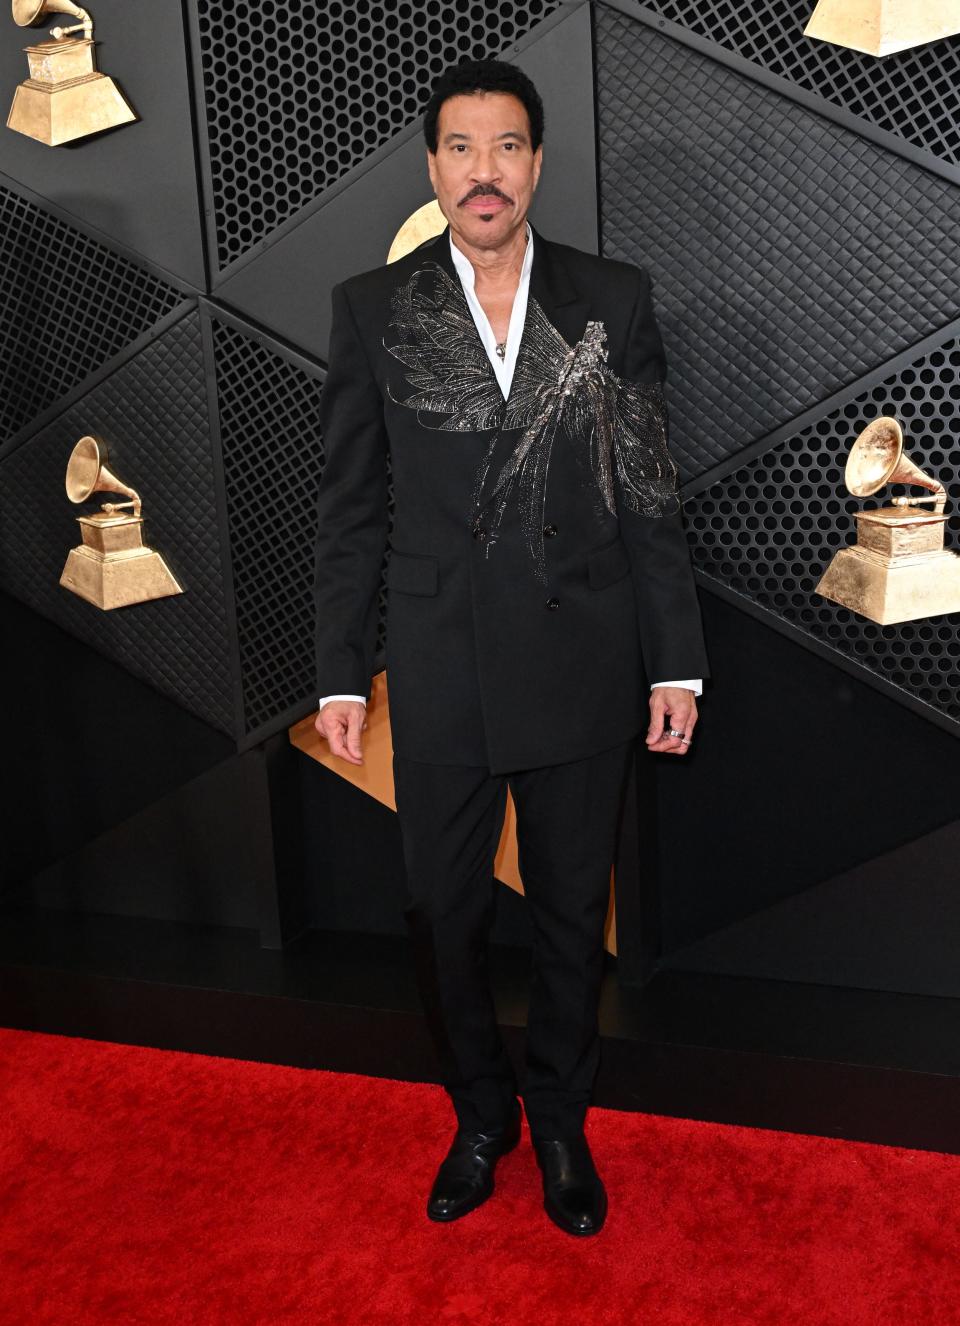 Lionel Richie at the 66th Annual Grammy Awards at the Crypto.com Arena in Los Angeles.